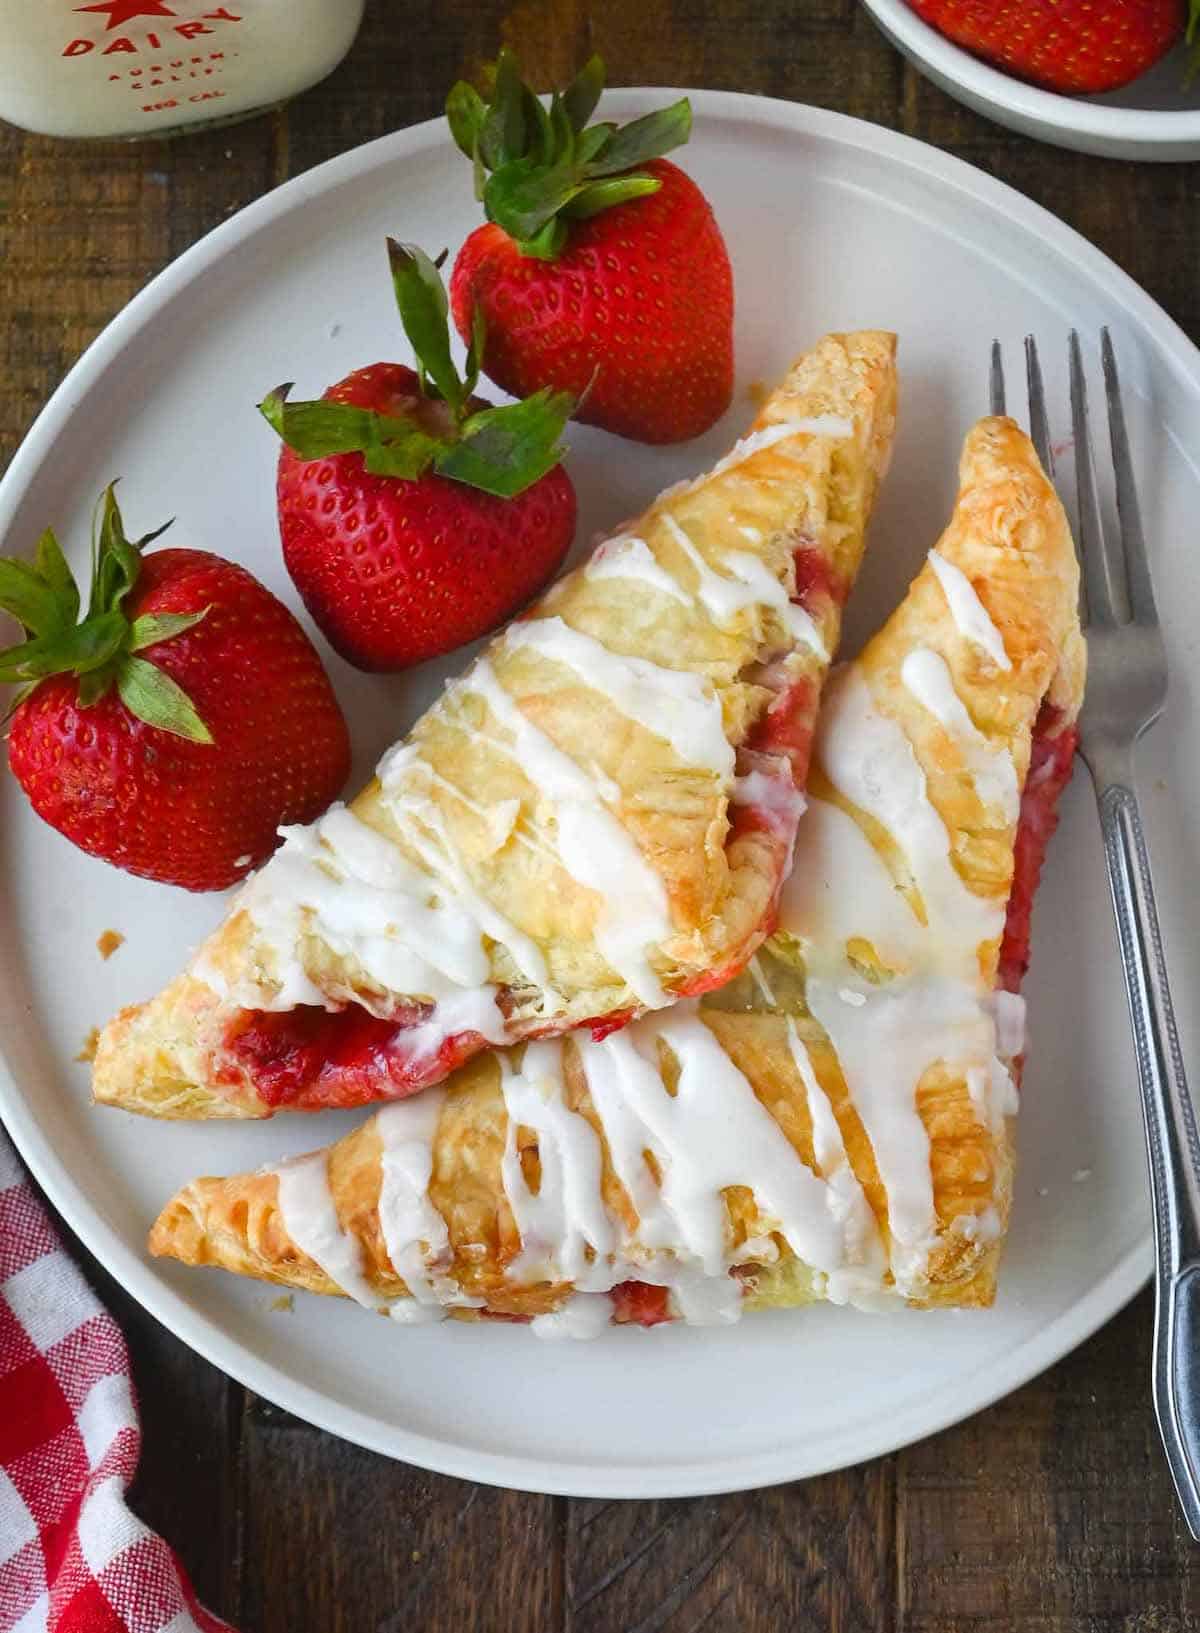 Two strawberry turnovers on a white plate with a few fresh strawberries.